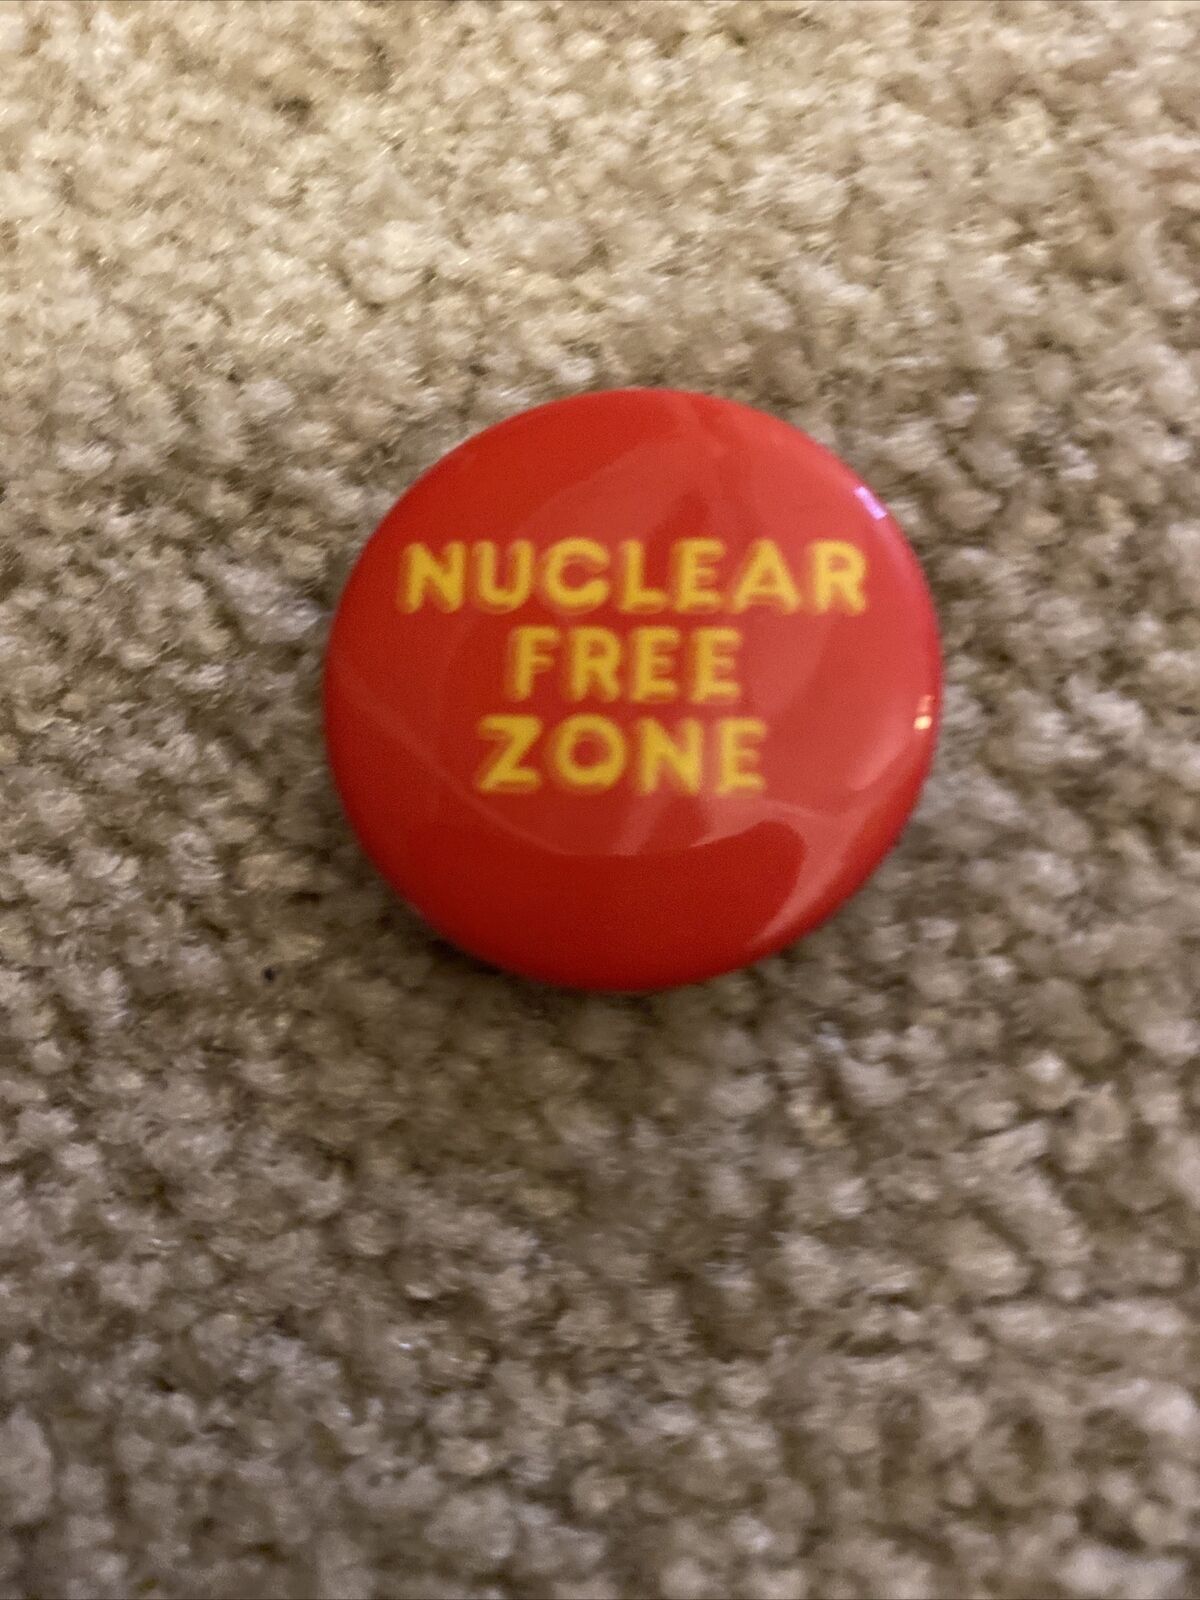 NUCLEAR FREE ZONE 1982 Anti Nuclear Protest Button - Nuclear Free Zone pin